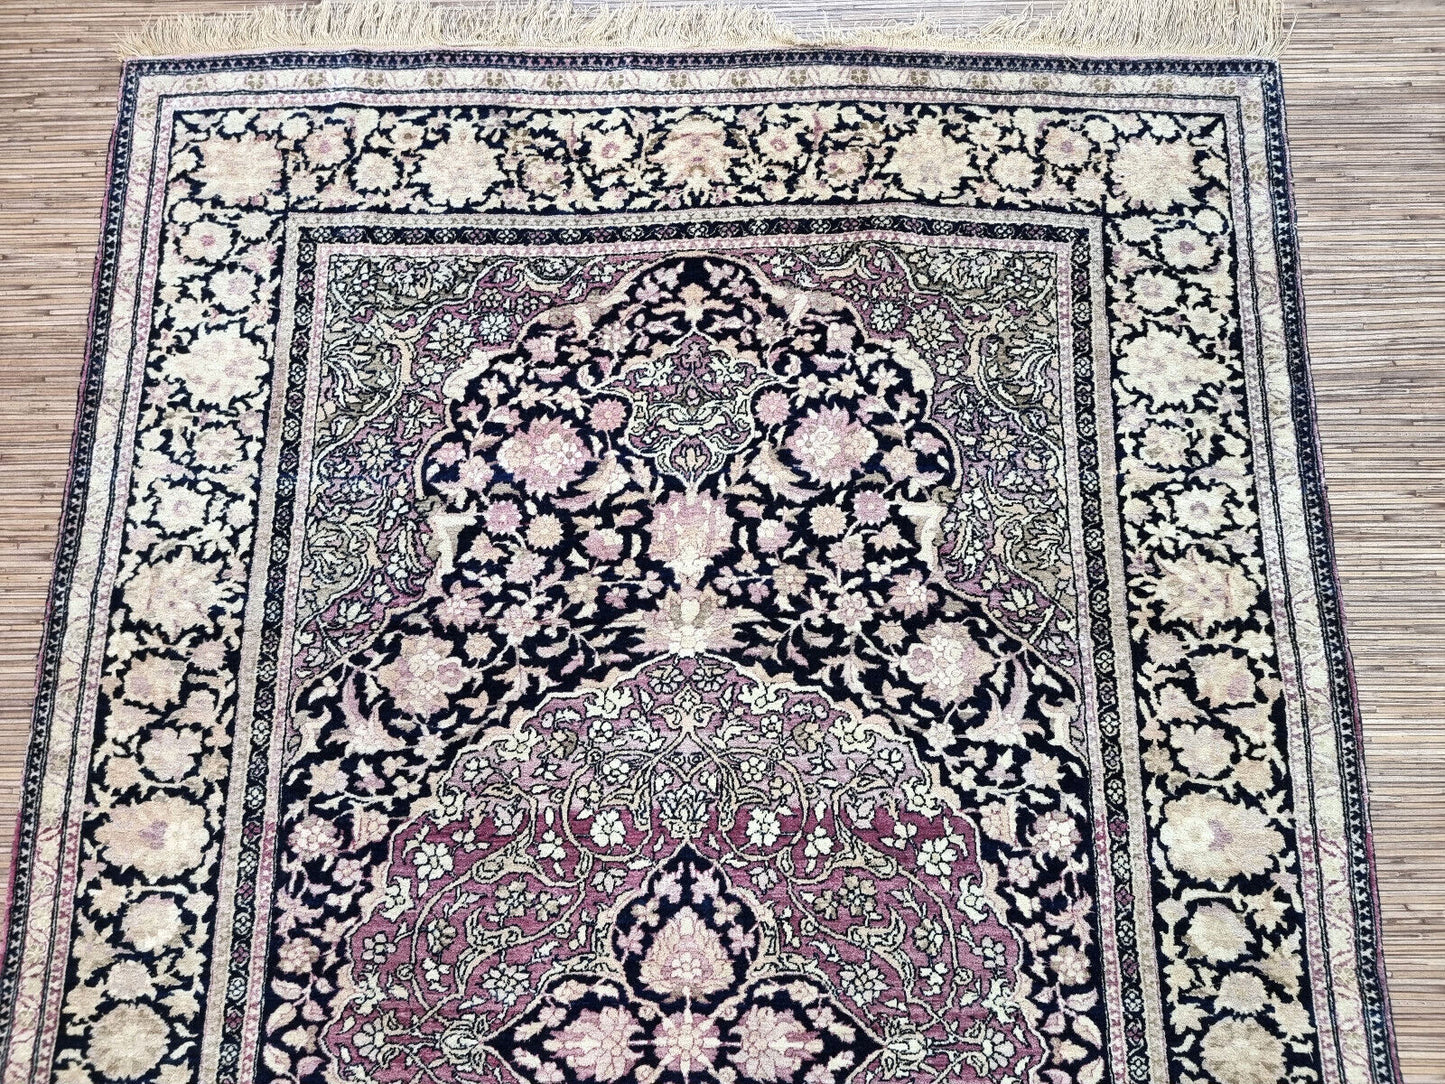 Handmade antiaue Persian Isfahan rug in traditional floral design with large medalllioin. The rug is from the beginning of 20th century in original good condition. It is made in wool.